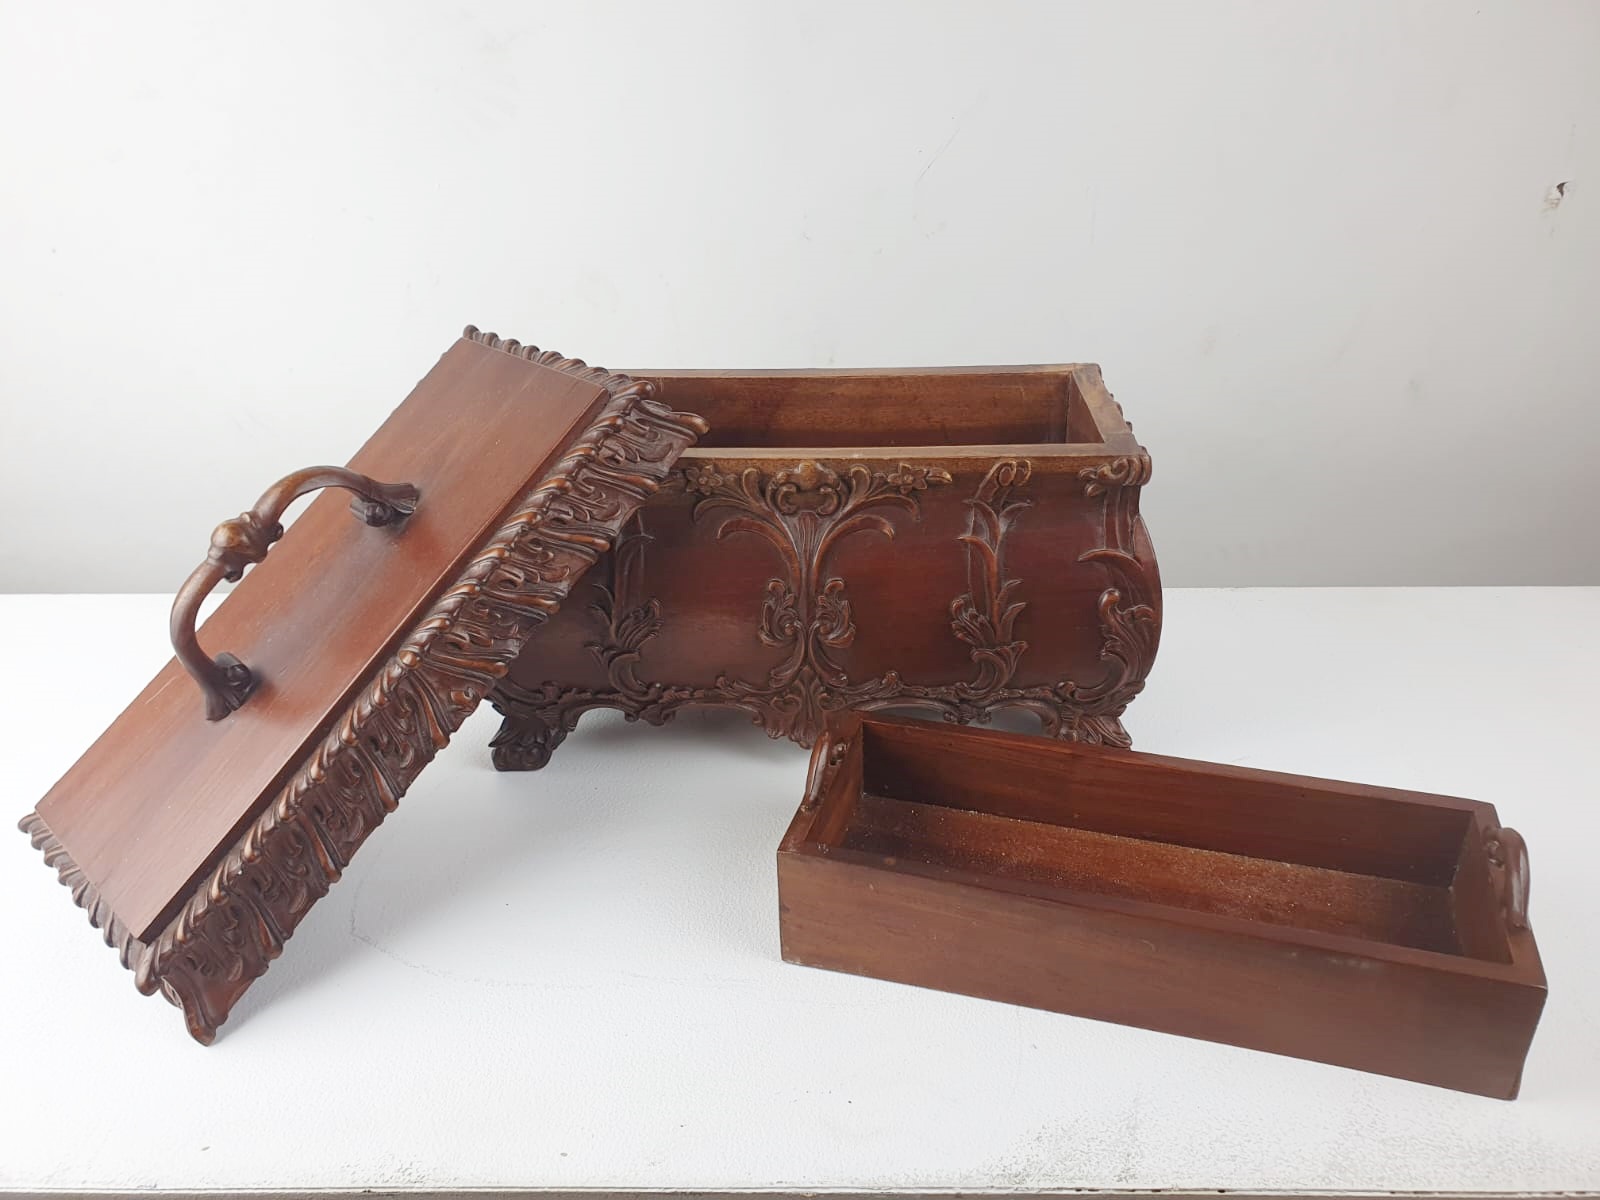 Finely carved wooden box releasing a small tray and compartments.